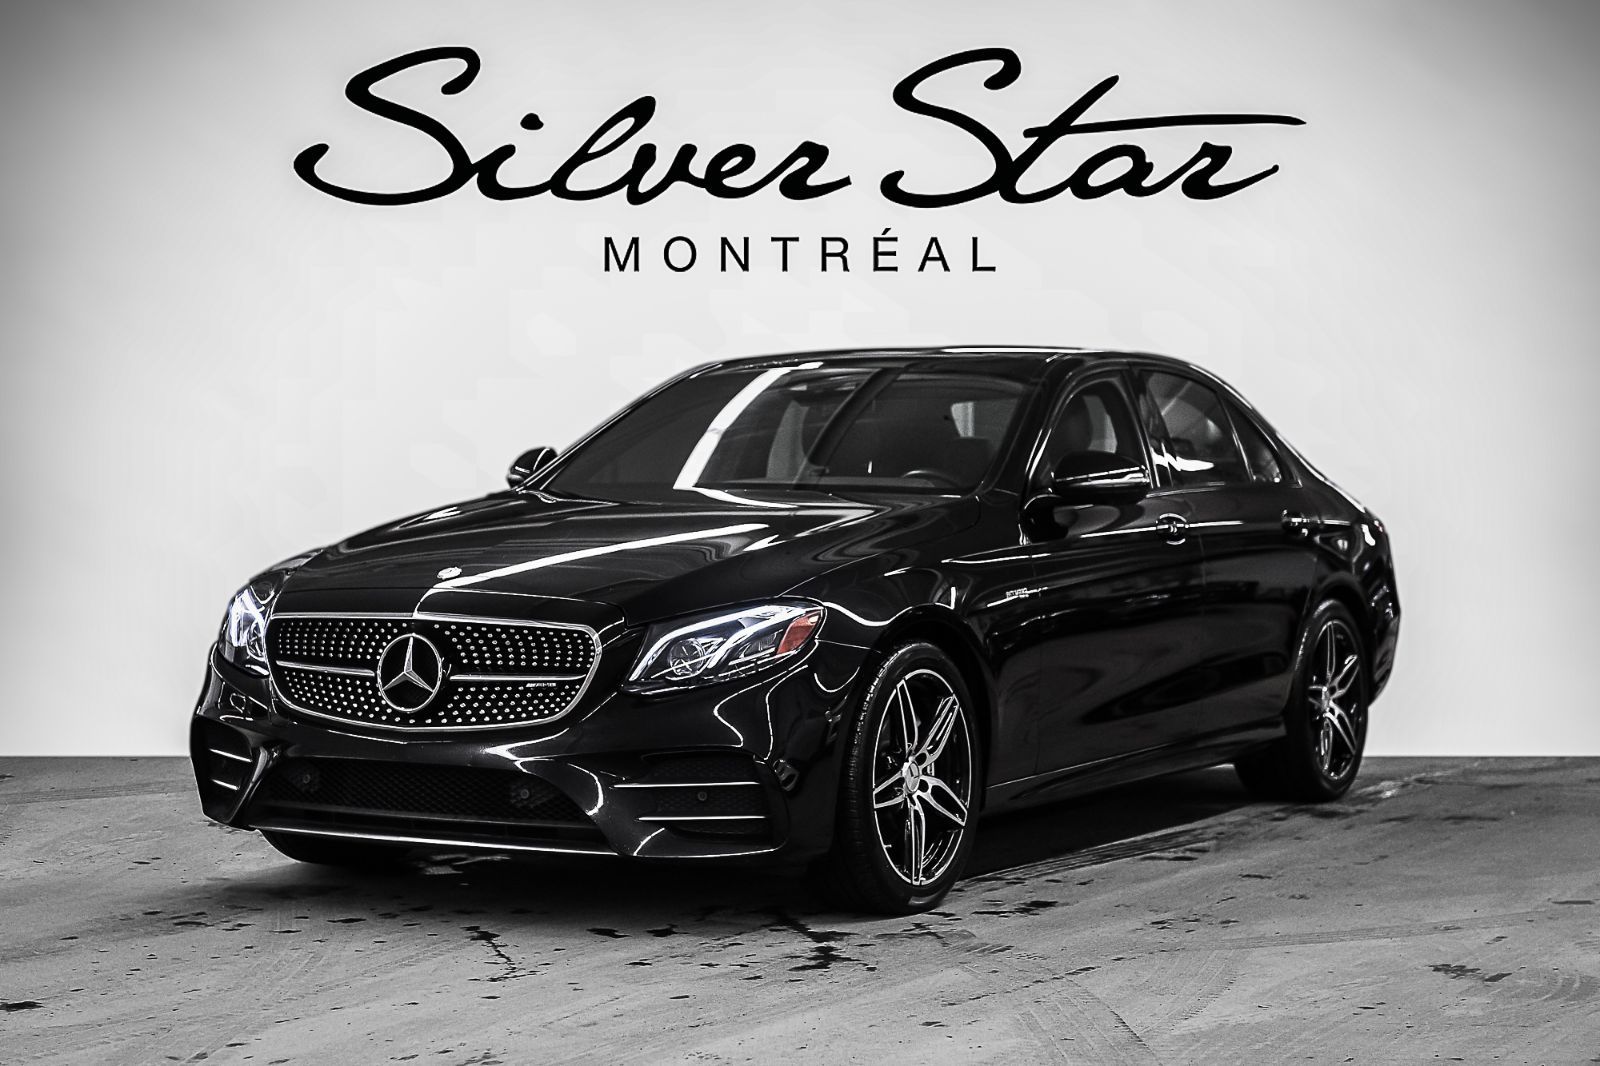 Silver Star Montreal 2017 Mercedes Benz E43 Amg For Sale 65 000